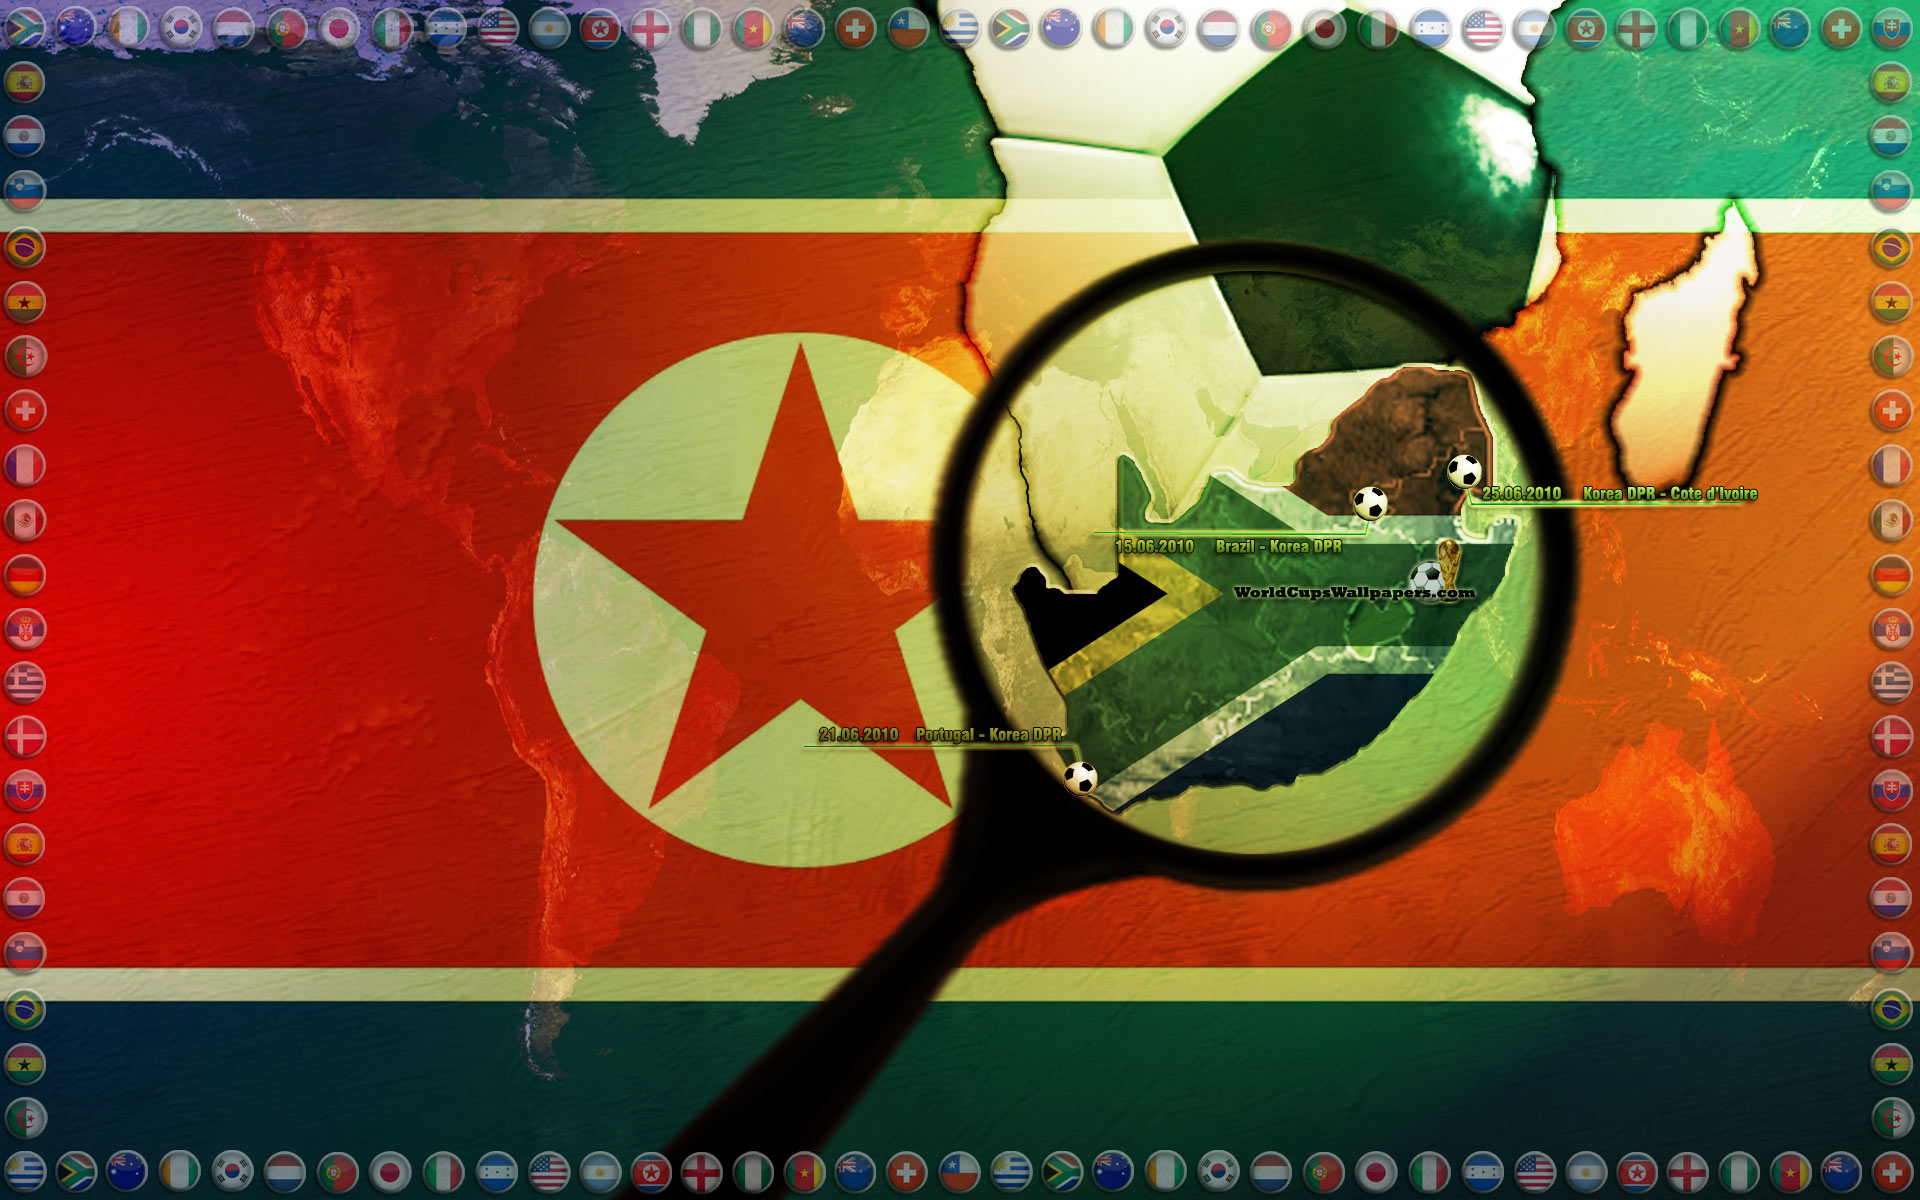 North Korea FIFA World Cup wallpapers and images wallpapers